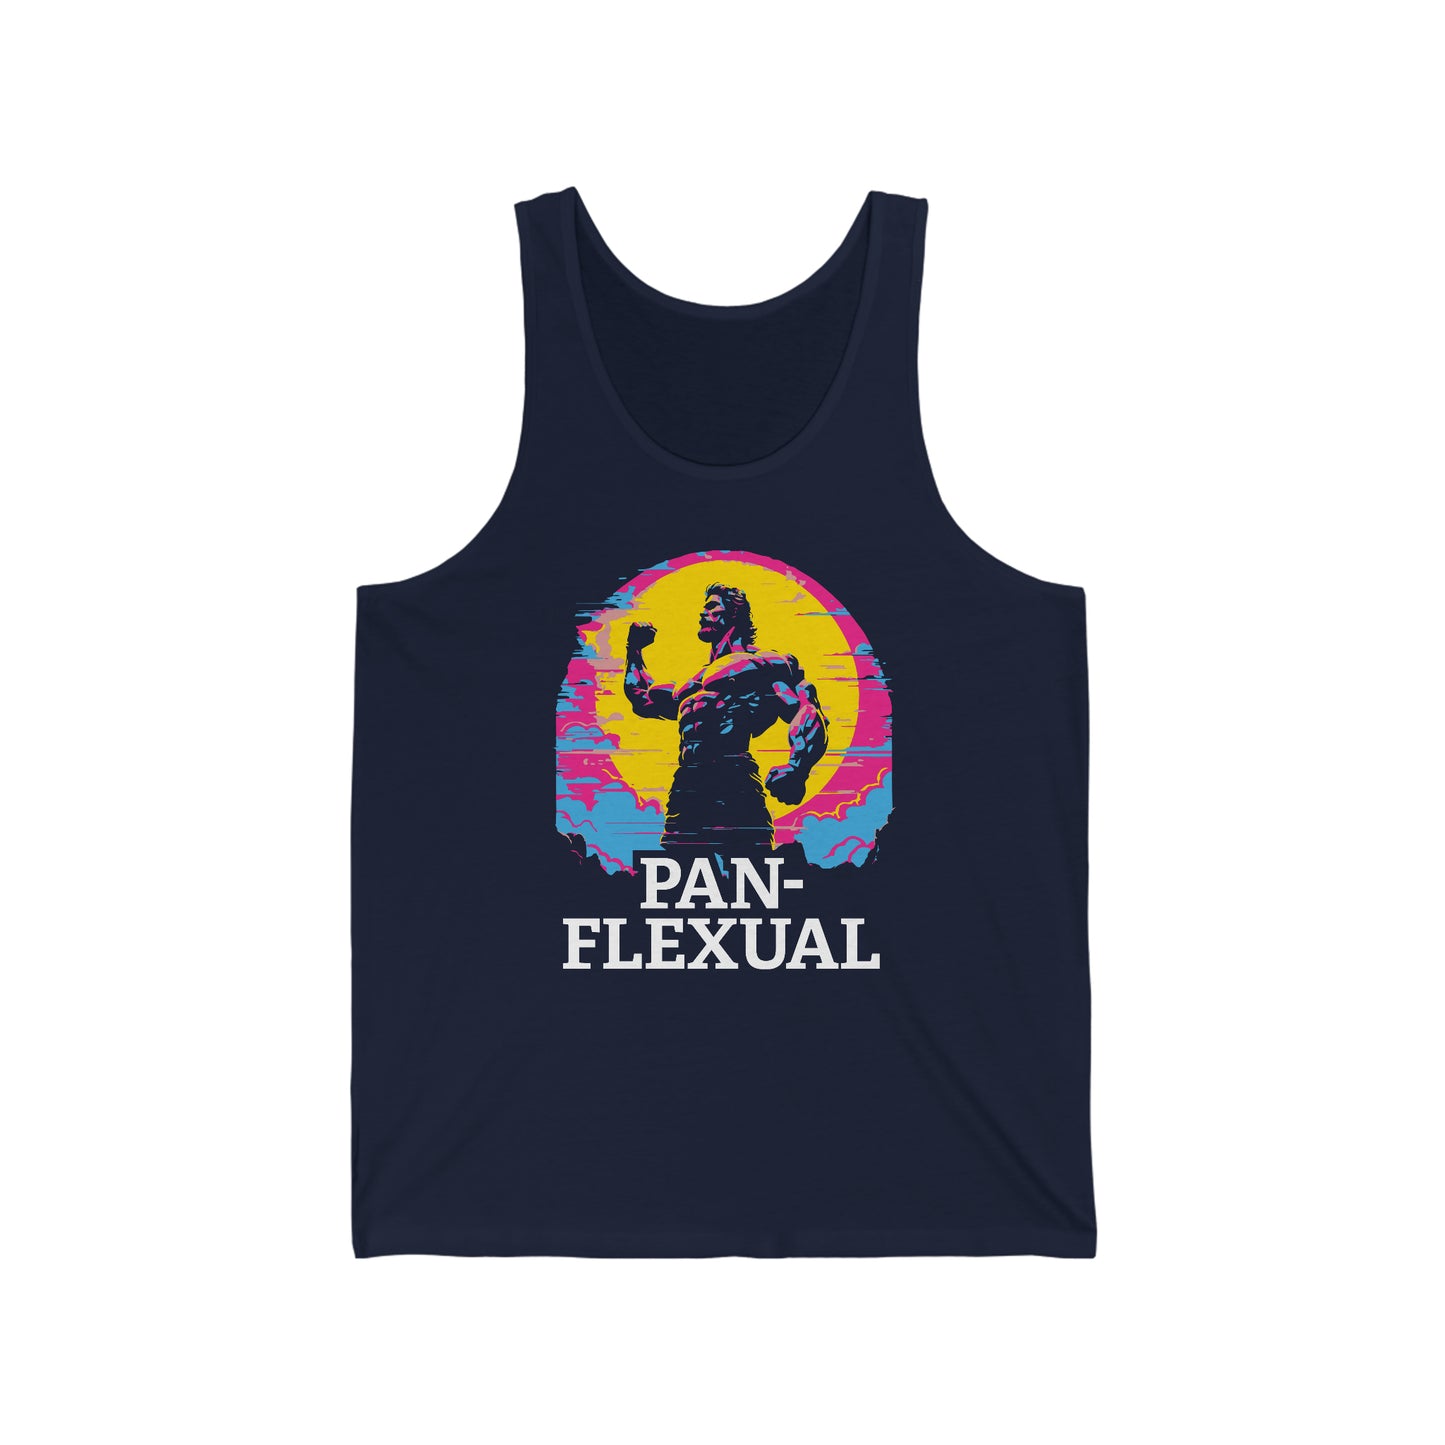 Navy blue tank top featuring a graphic with a muscled bodybuilder and the phrase "Pan-Flexual" on it.